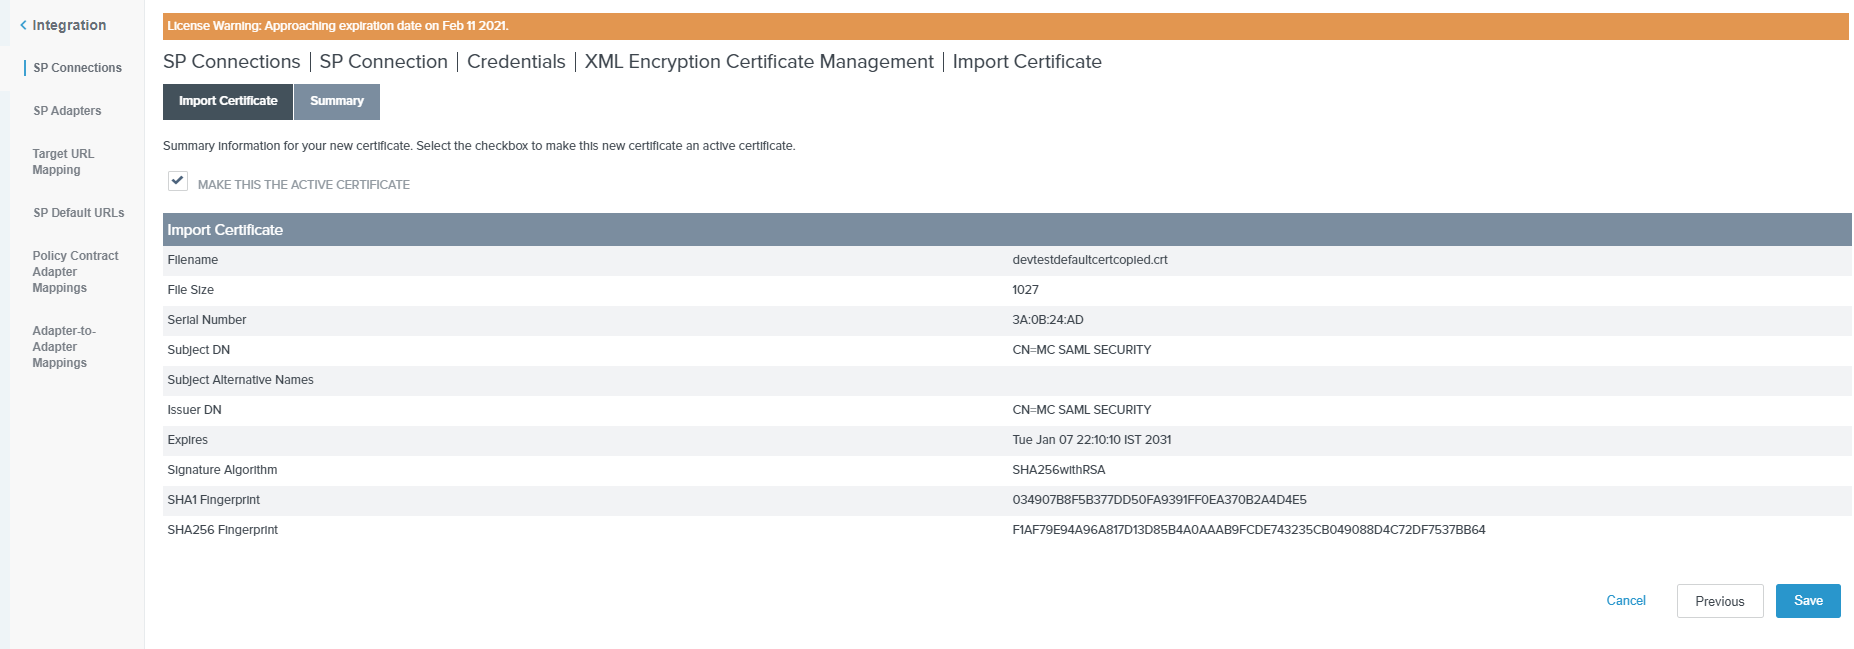 SP Connections Credentials XML Encryption Certificate Management Import Summary